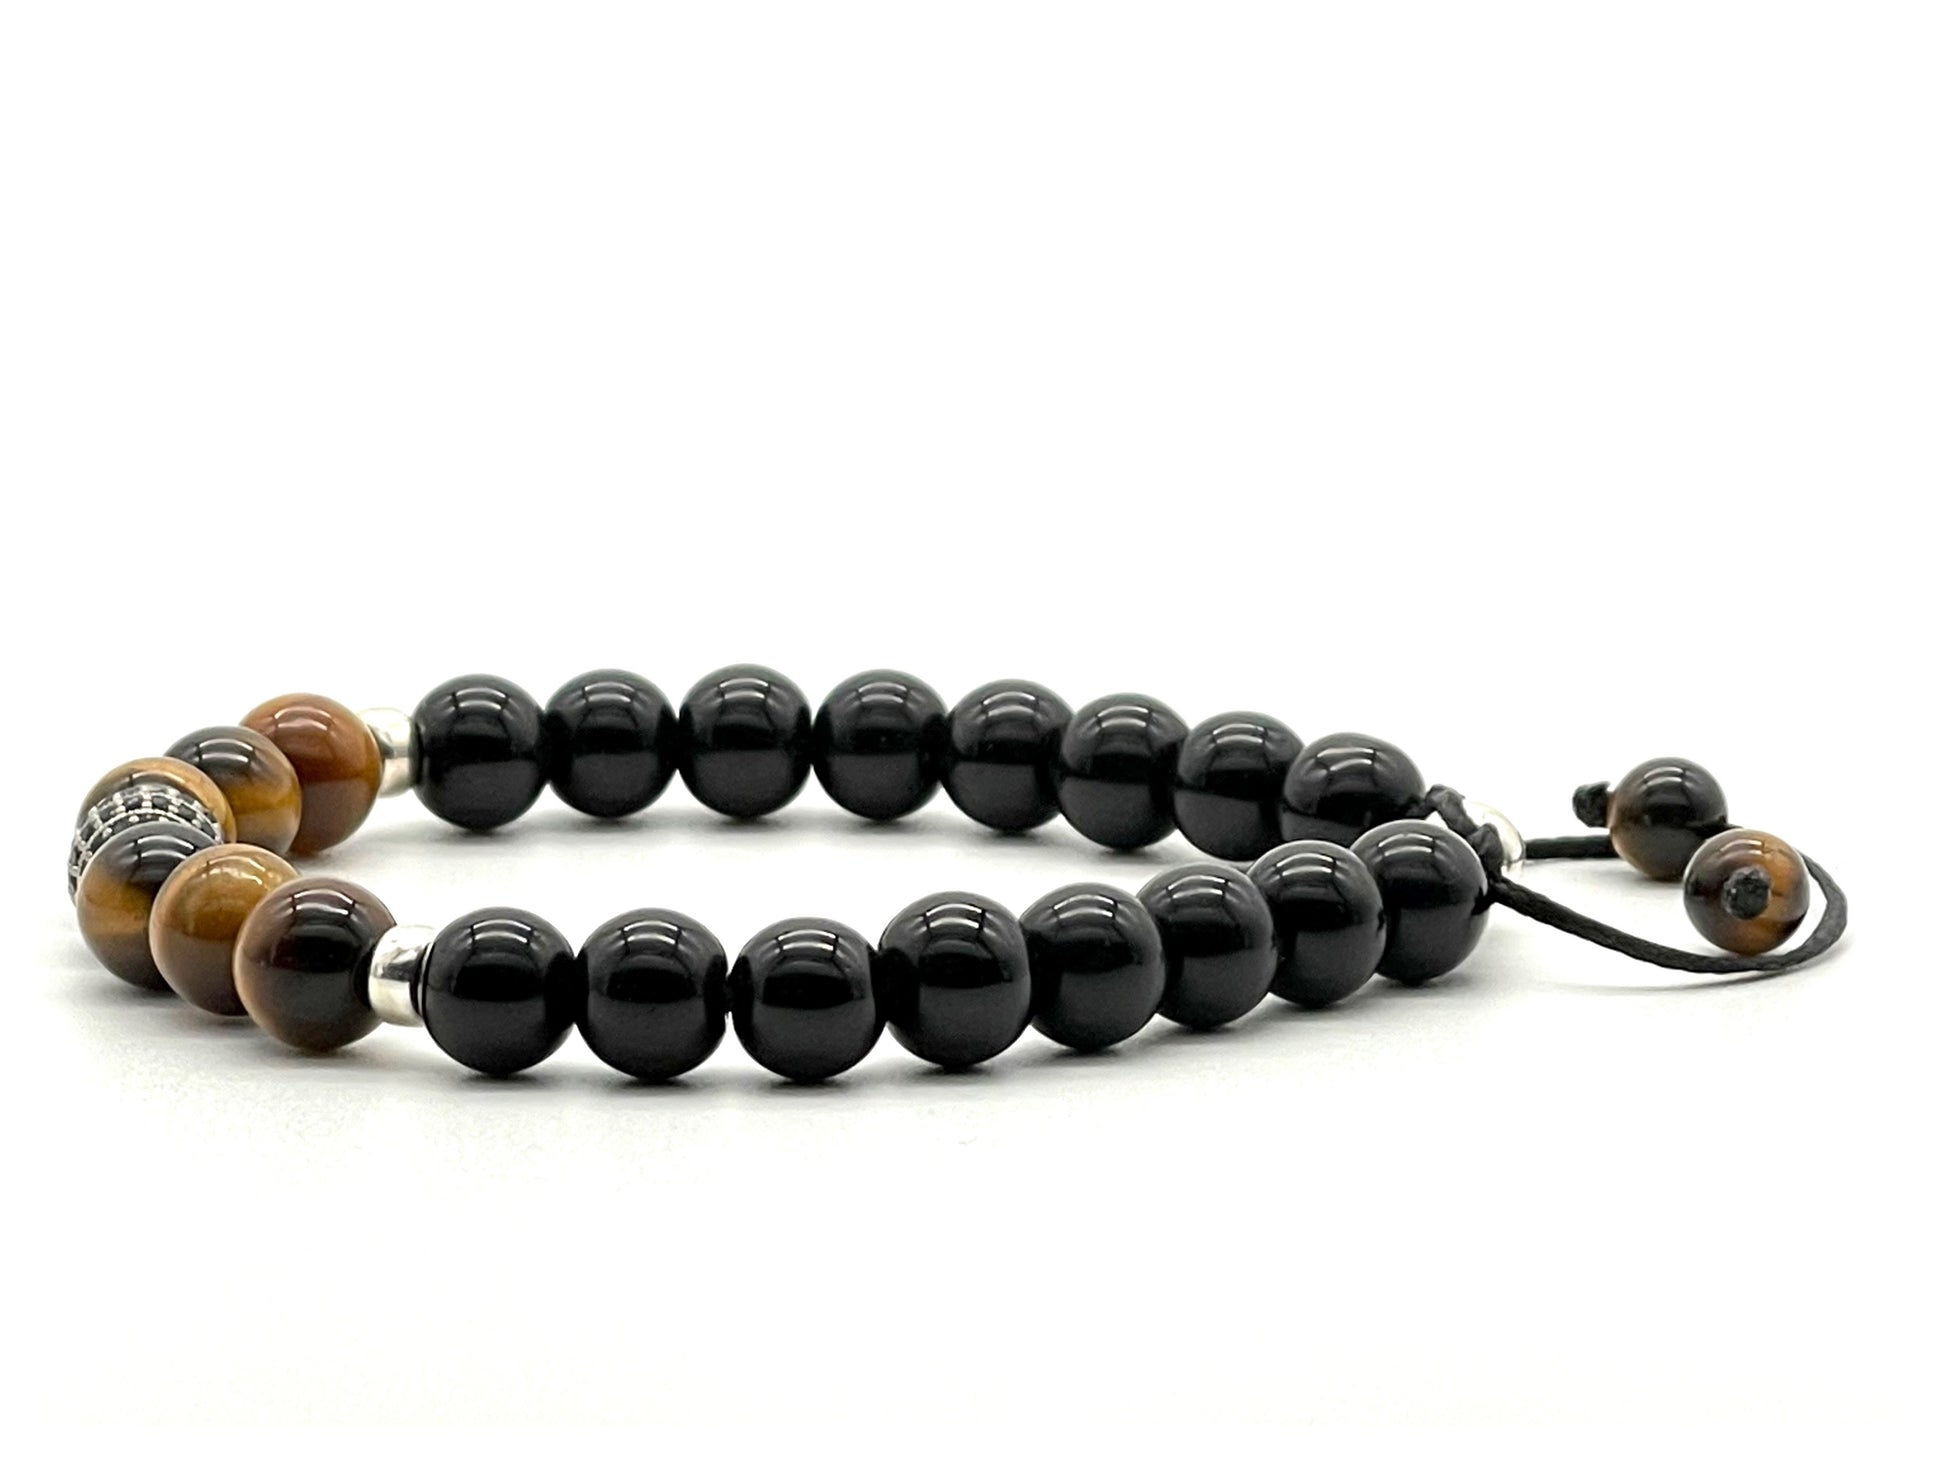 Luxury Tiger Eye Stone Bracelet For Men And Women Designer Party Black Bead  Strands With Cubic Zirconia B Beads In Silver And Gold Perfect Gift For  Lovers From Jmyy, $5.86